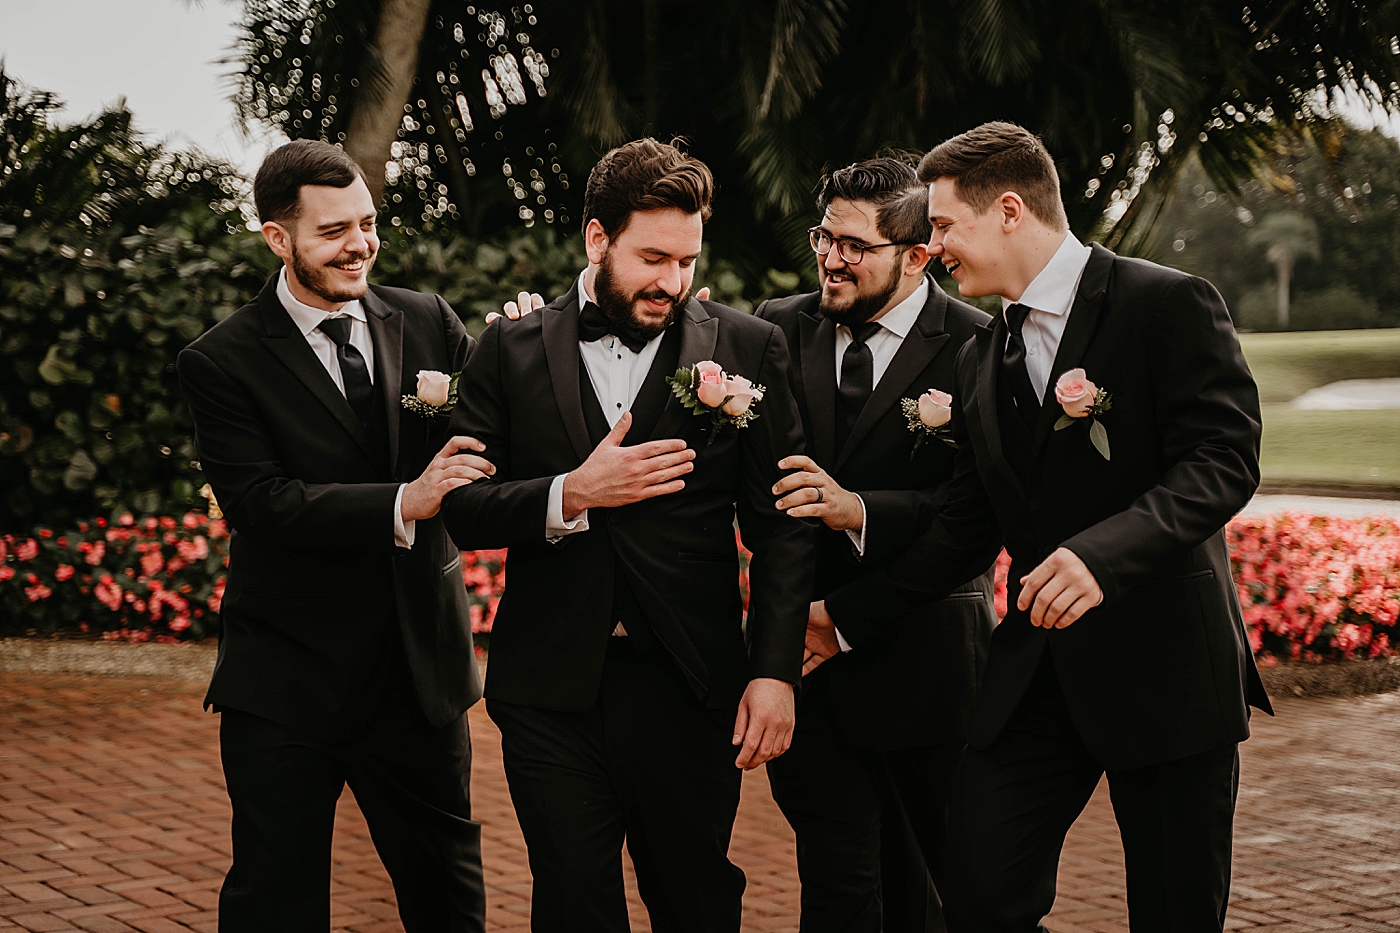 Groomsmen celebrating with Groom outside by golf course Romantic Winter Wedding captured NYC Wedding Planner Poppy and Lynn